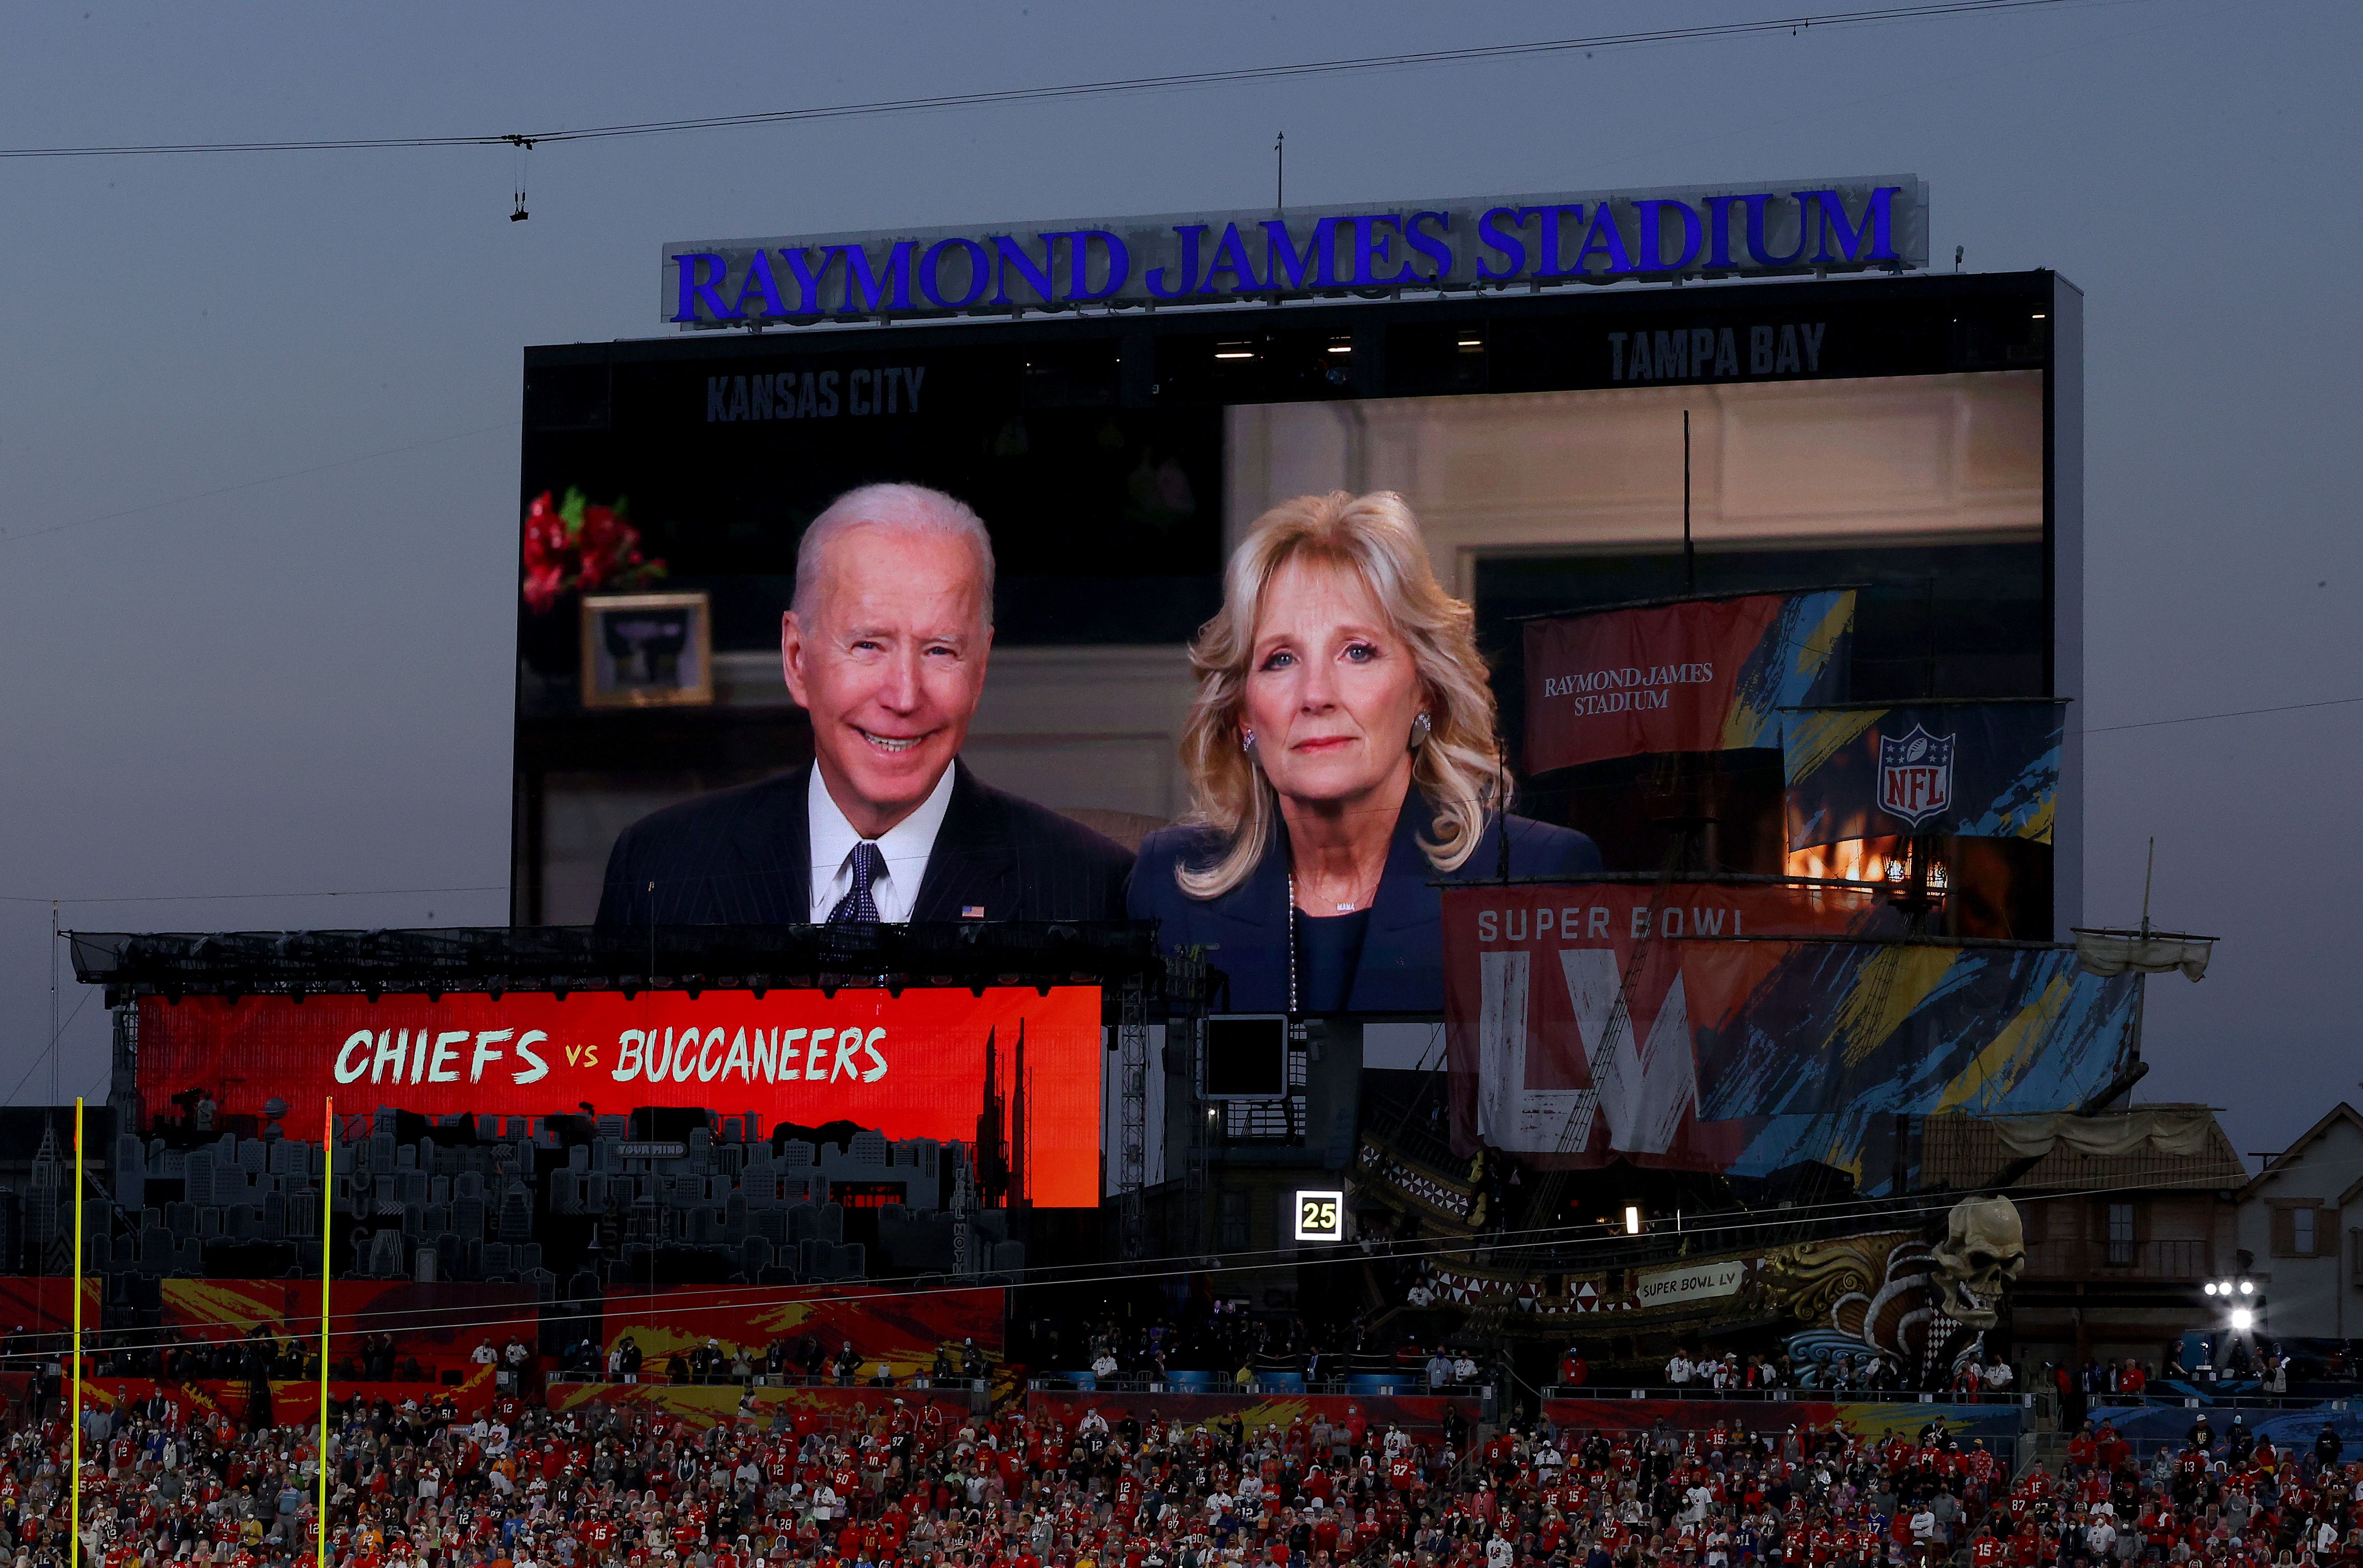 U.S. president Joe Biden and First Lady Dr. Jill Biden deliver an address in Super Bowl LV at Raymond James Stadium on February 07, 2021 in Tampa, Florida.